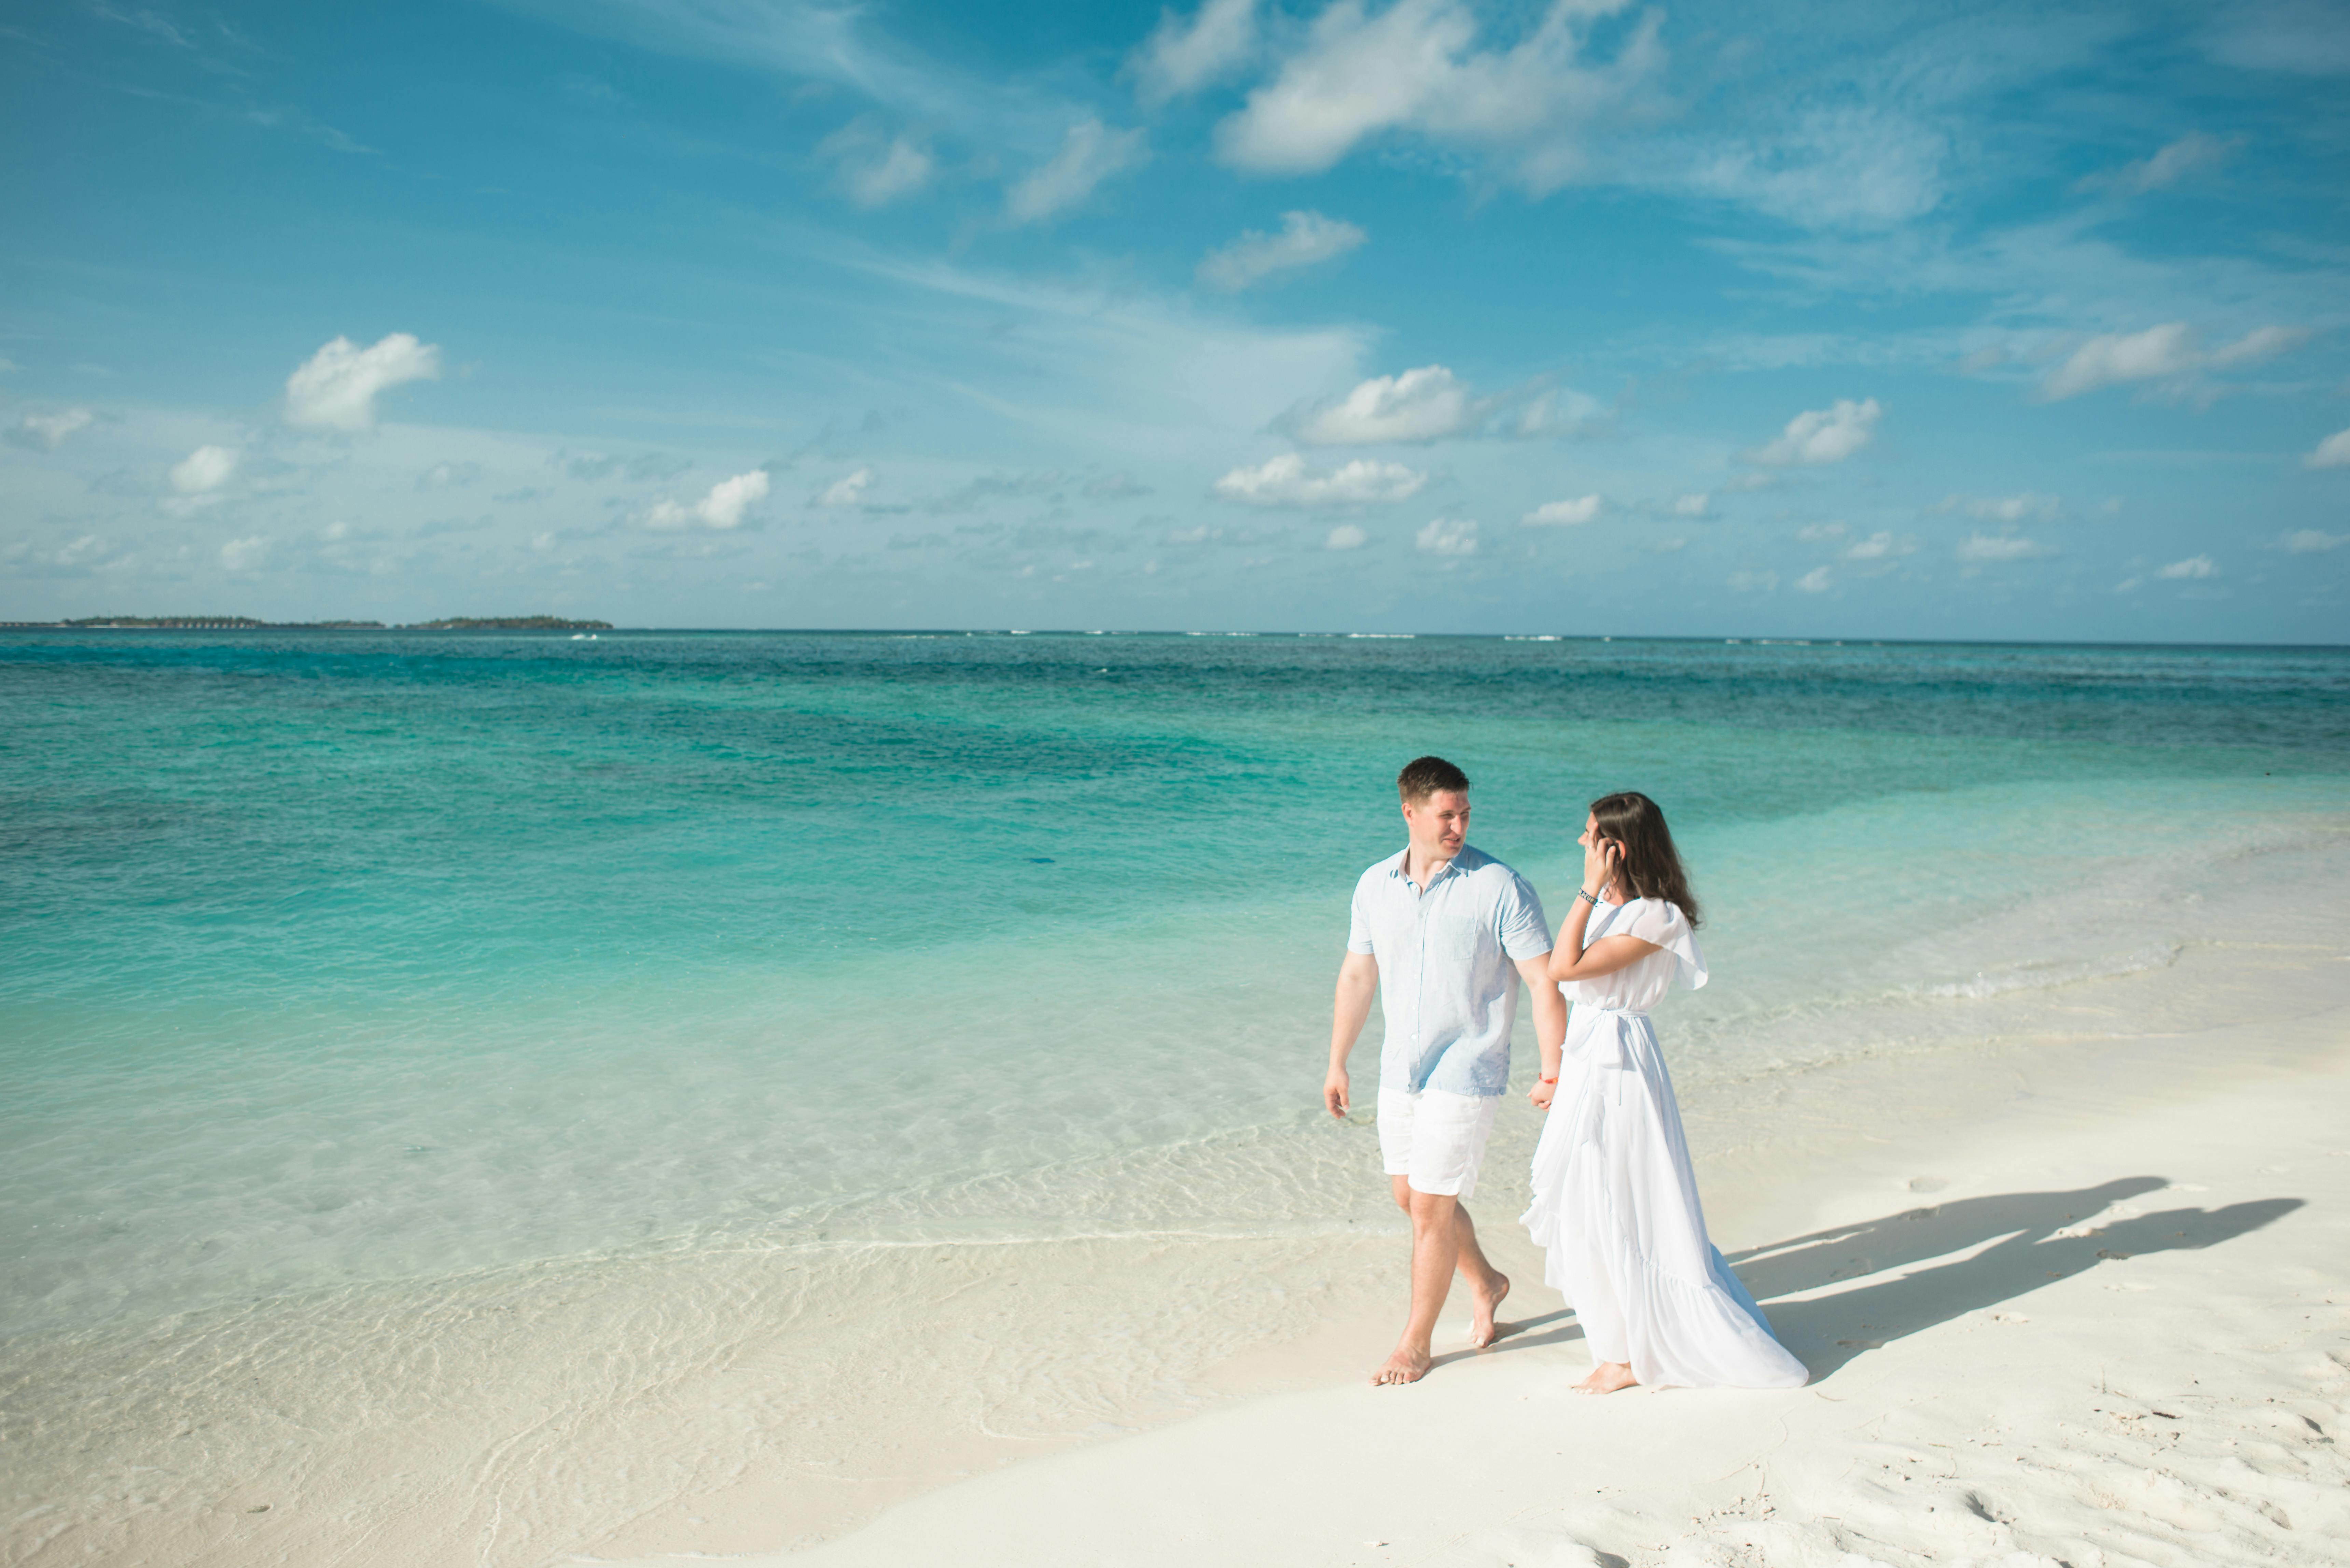 Newlywed couple wearing white on a beautiful white sand beach with blue skies and turquoise waters